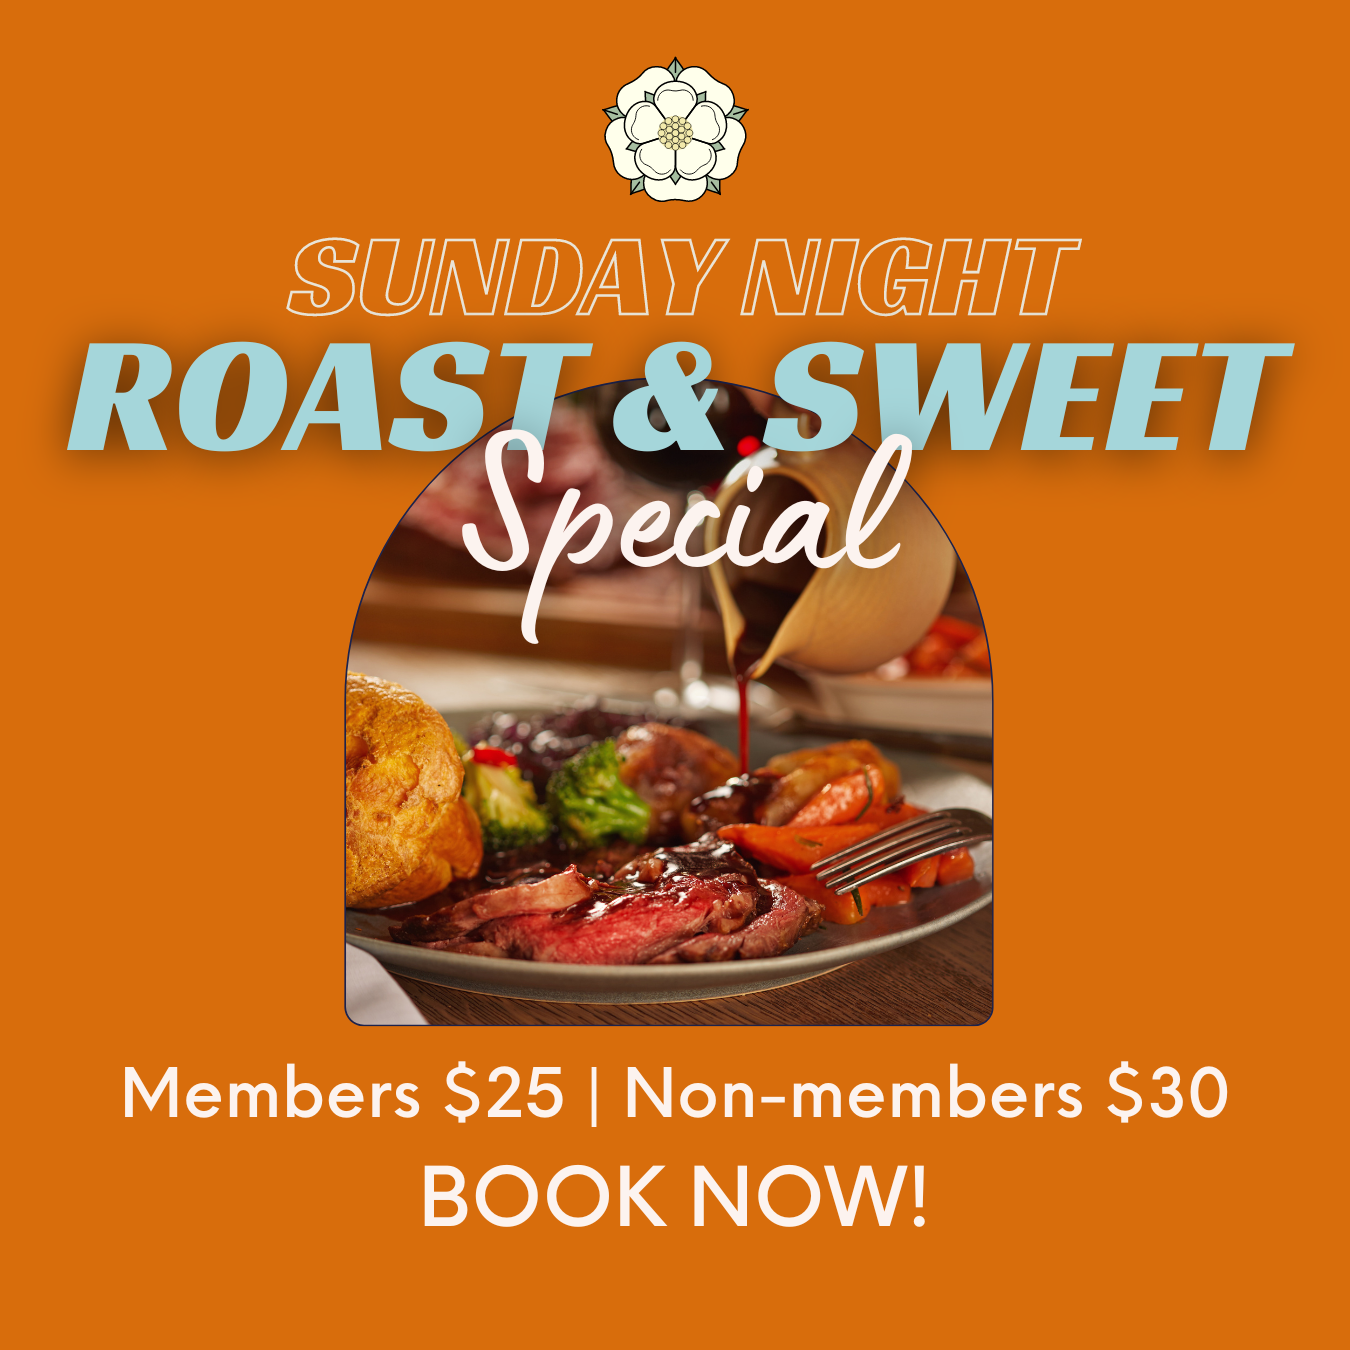 LCB_SPECIALS_Sunday Night_Roast & Sweet Special 2.png